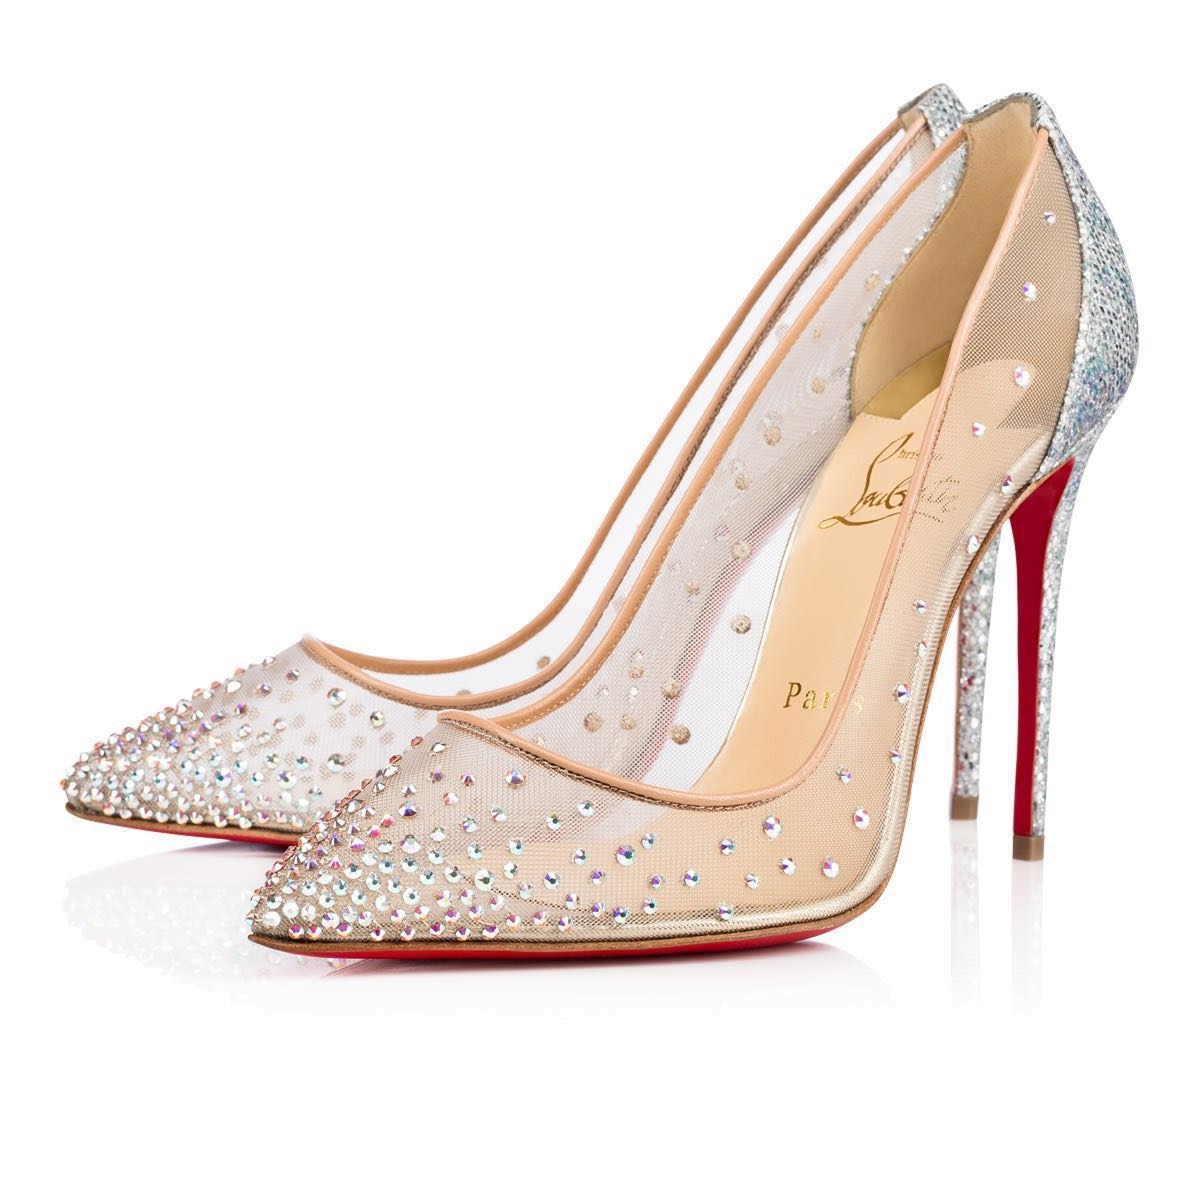 louboutin heels with crystals